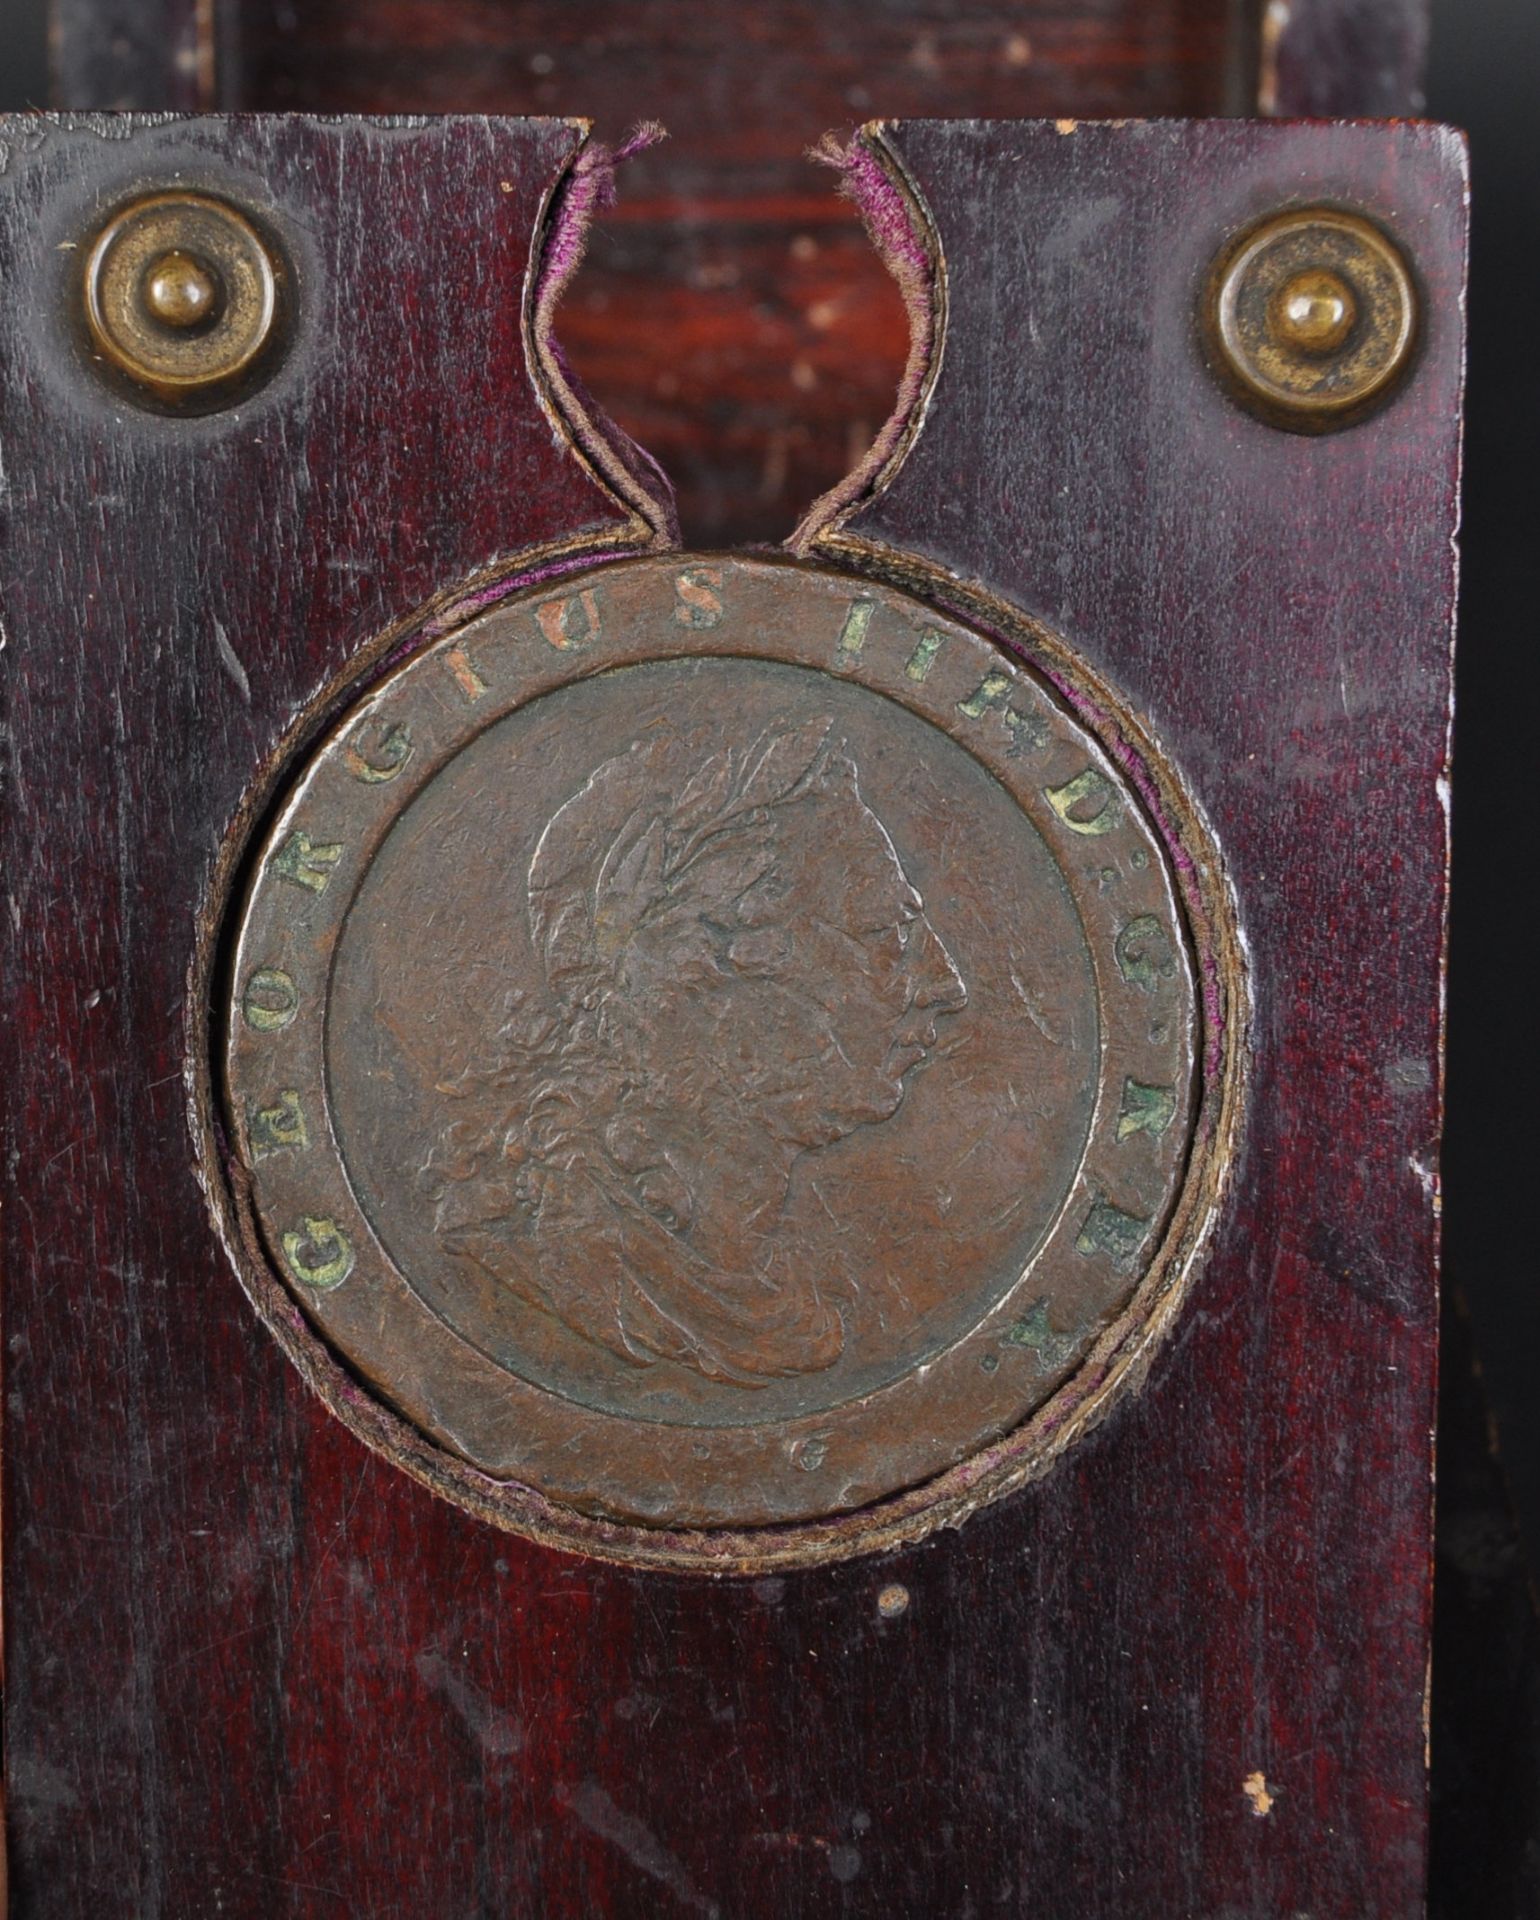 1797 KING GEORGE III COPPER BRITANNIA COIN IN WOODEN CASE - Image 4 of 5